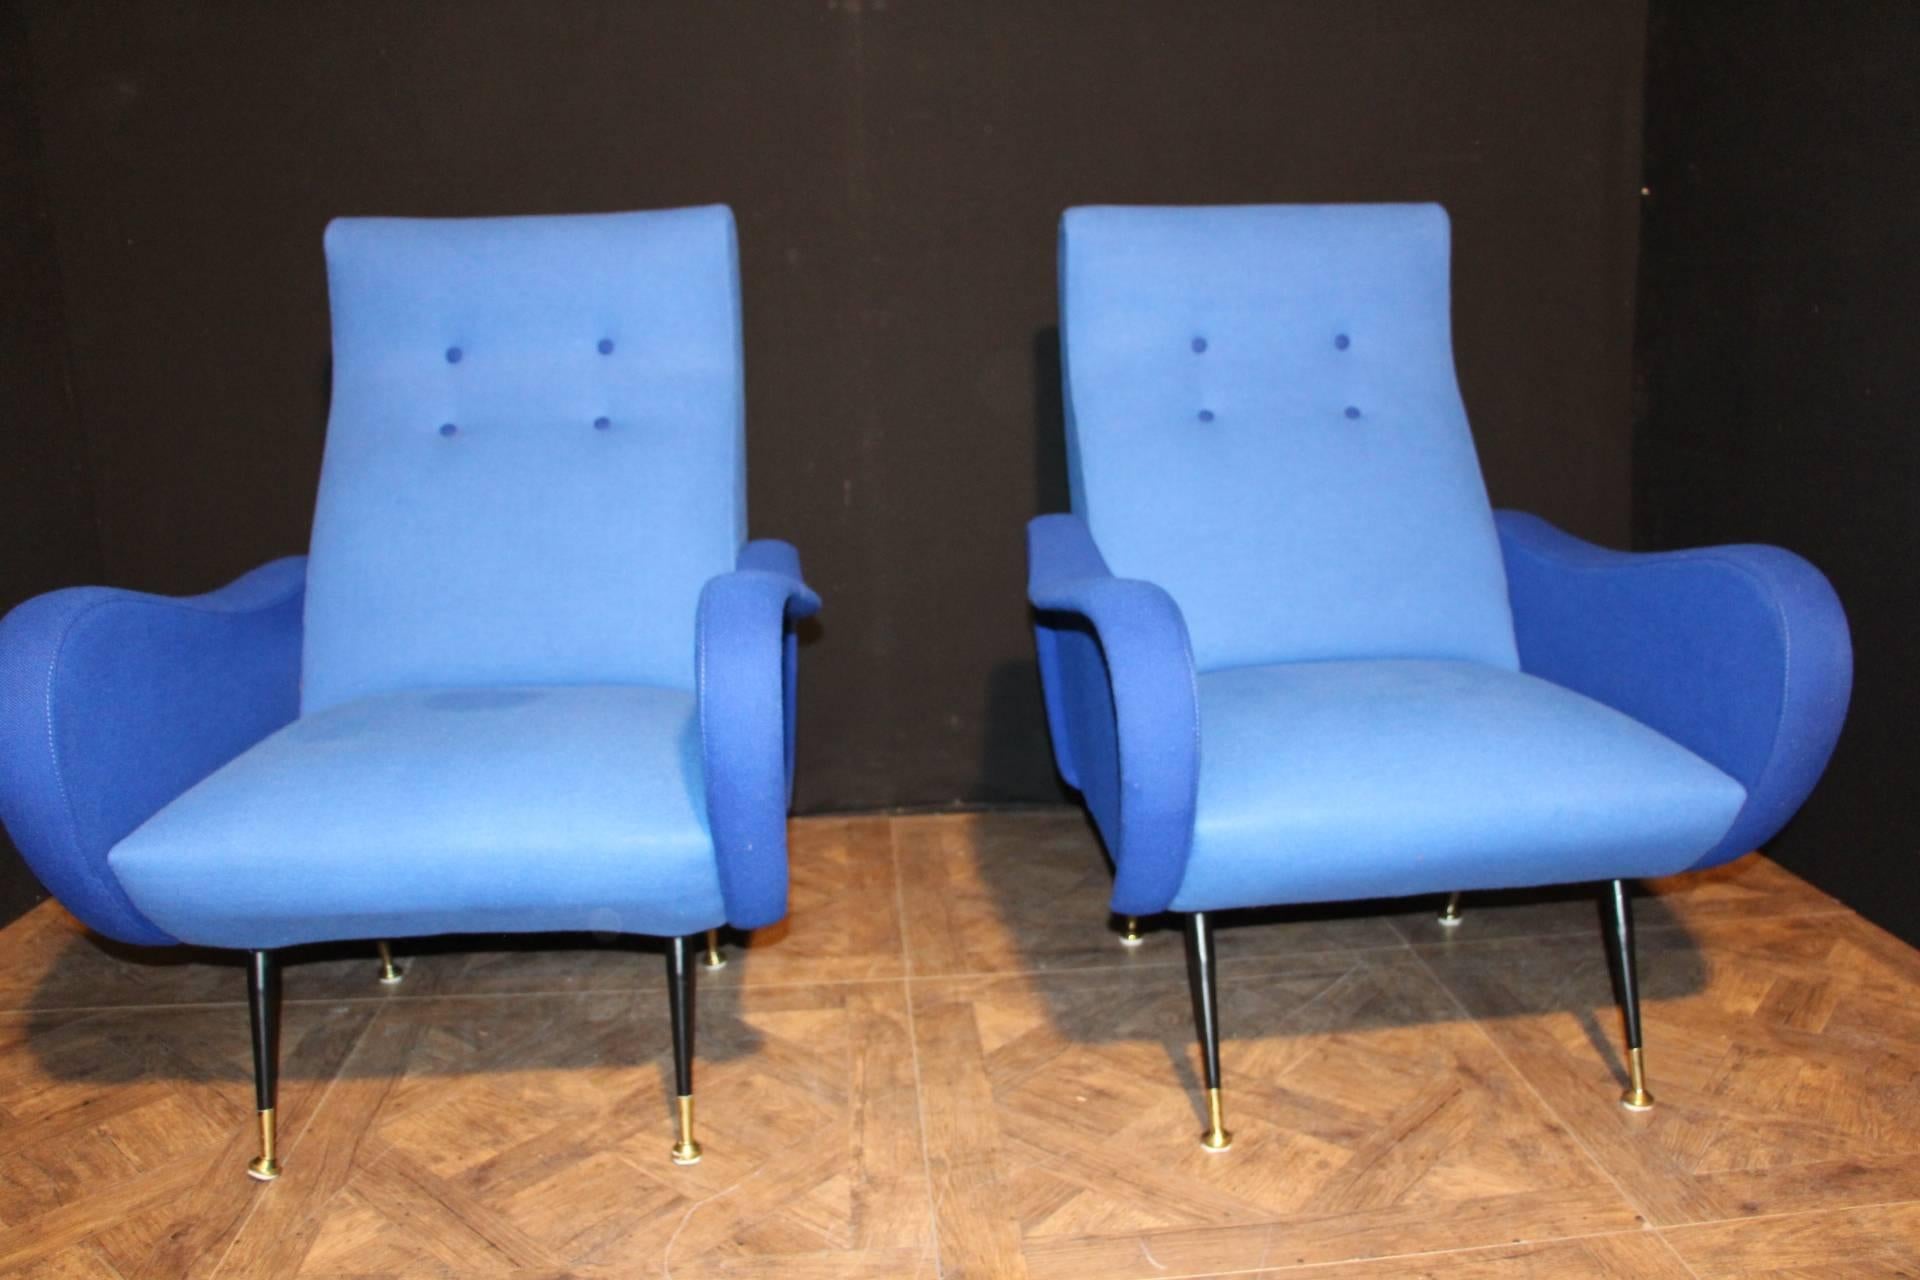 These armchairs are very elegant with their doube vibrant blue colors.They have got black lacquered steel and brass legs with brass sabots.
Moreover they offer relaxing comfort.